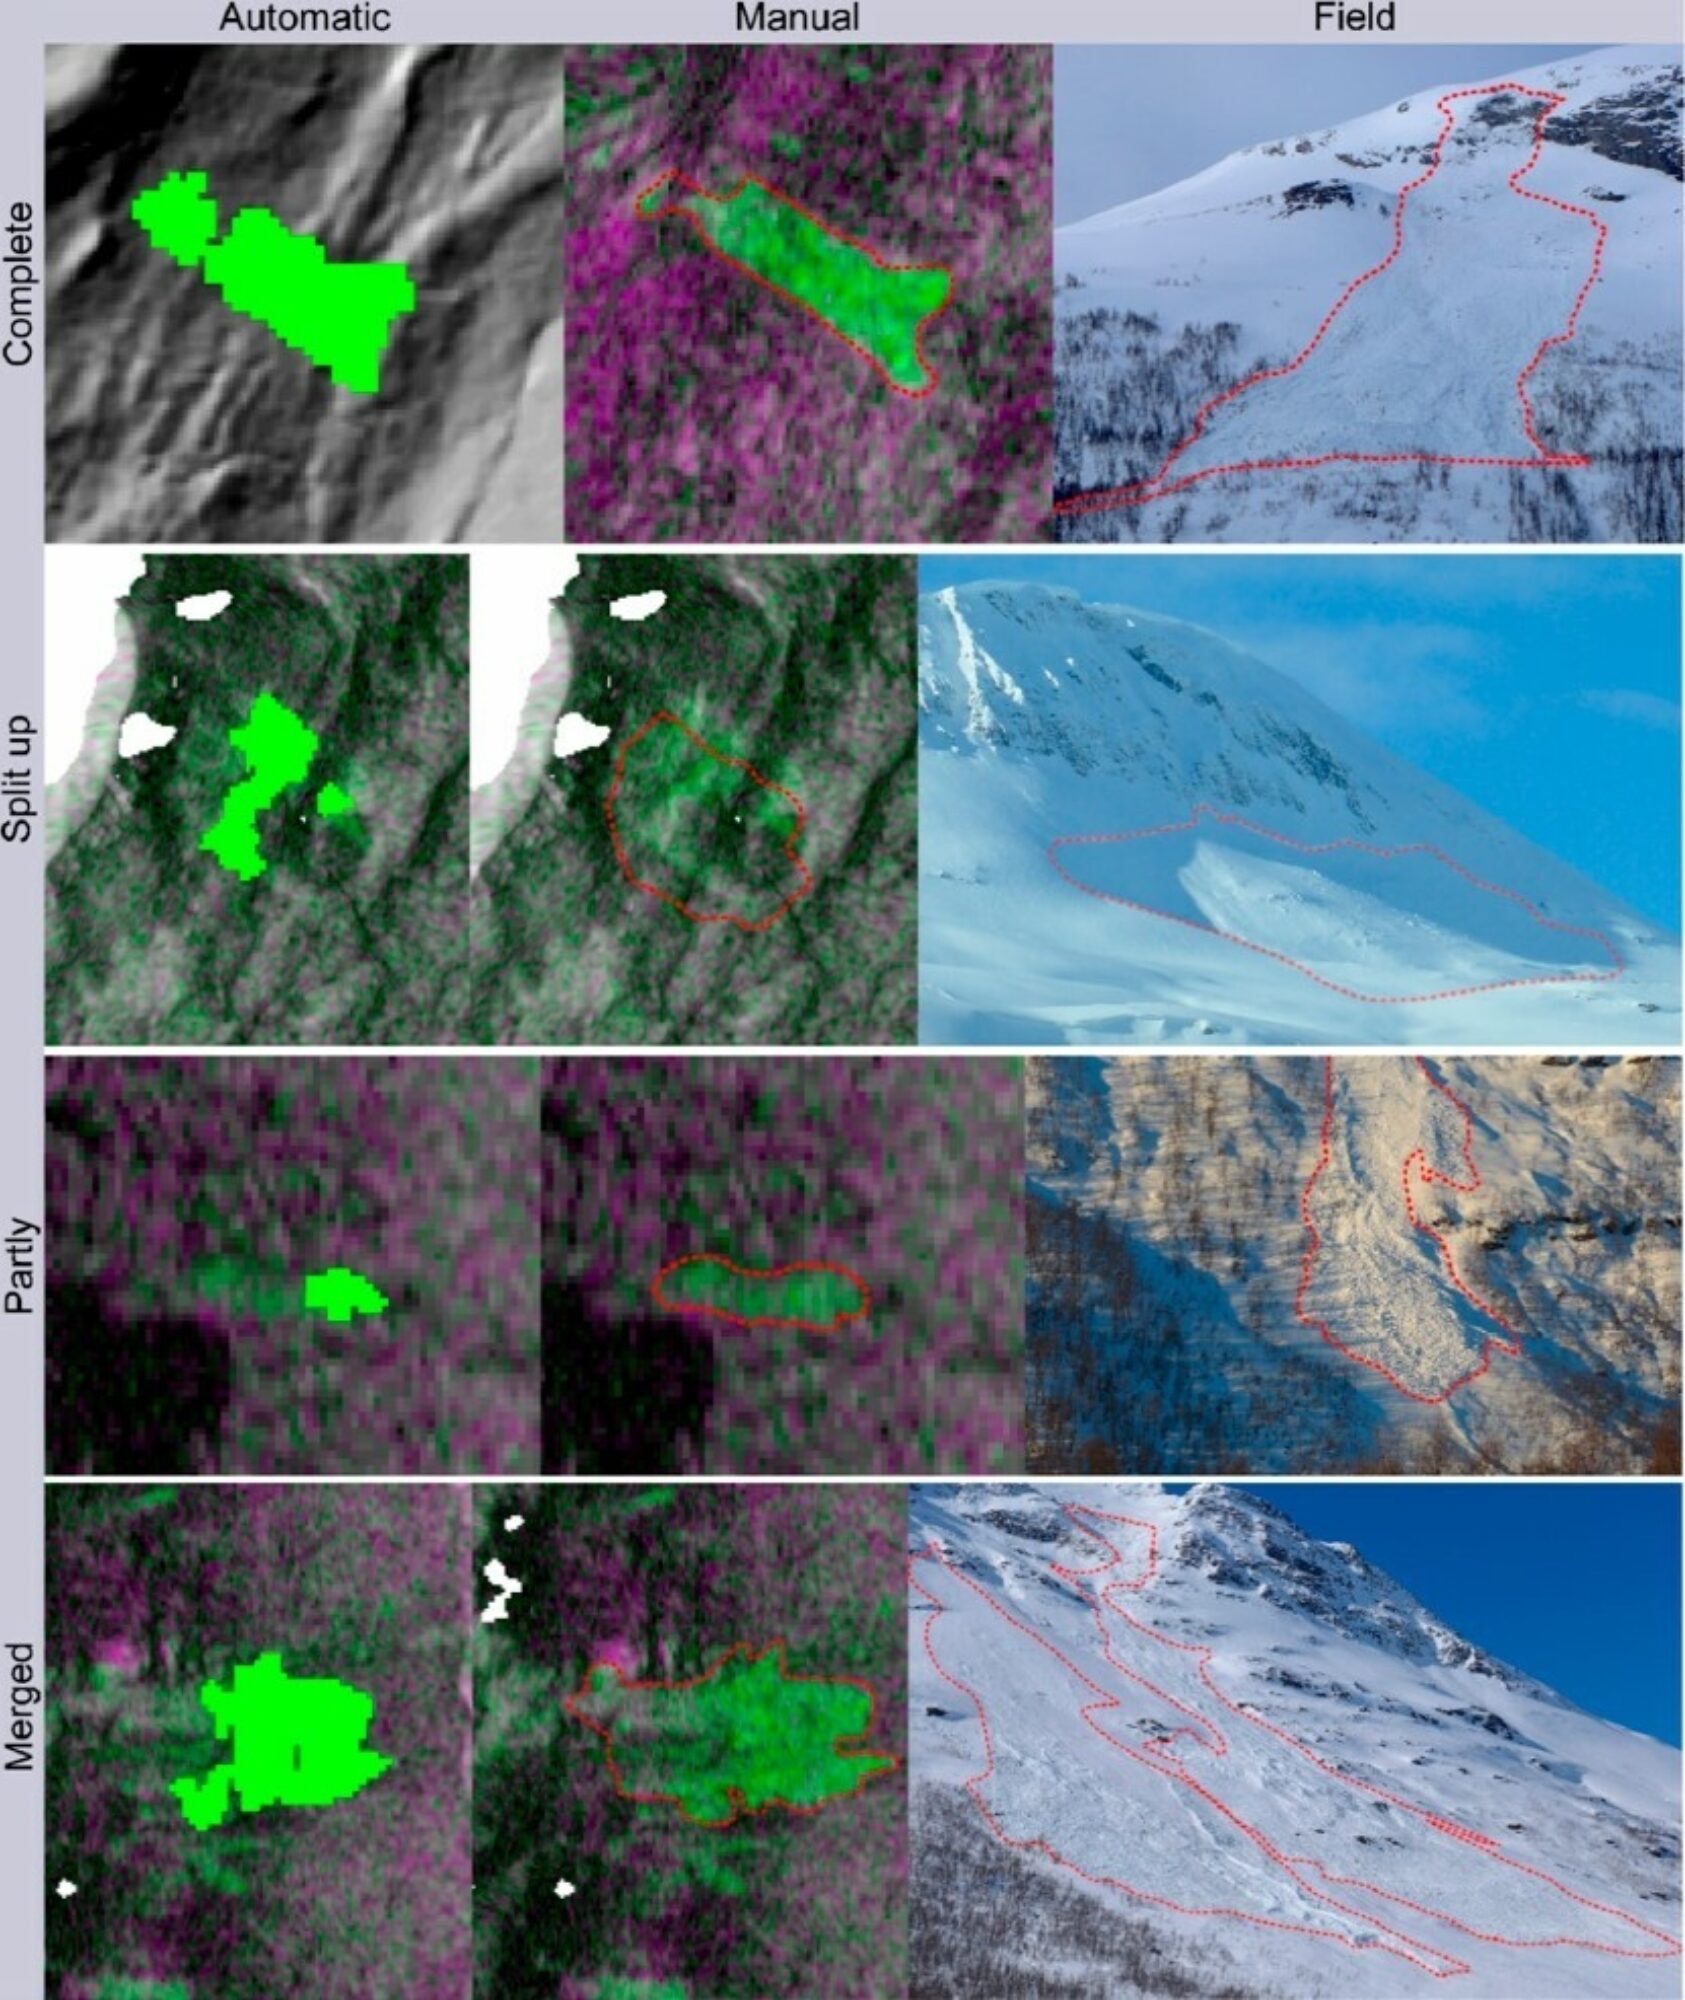 , Results of the snow avalanche detection using machine learning based on SAR images (automatic detection), compared with manual detection and field pictures., Figure4, , 